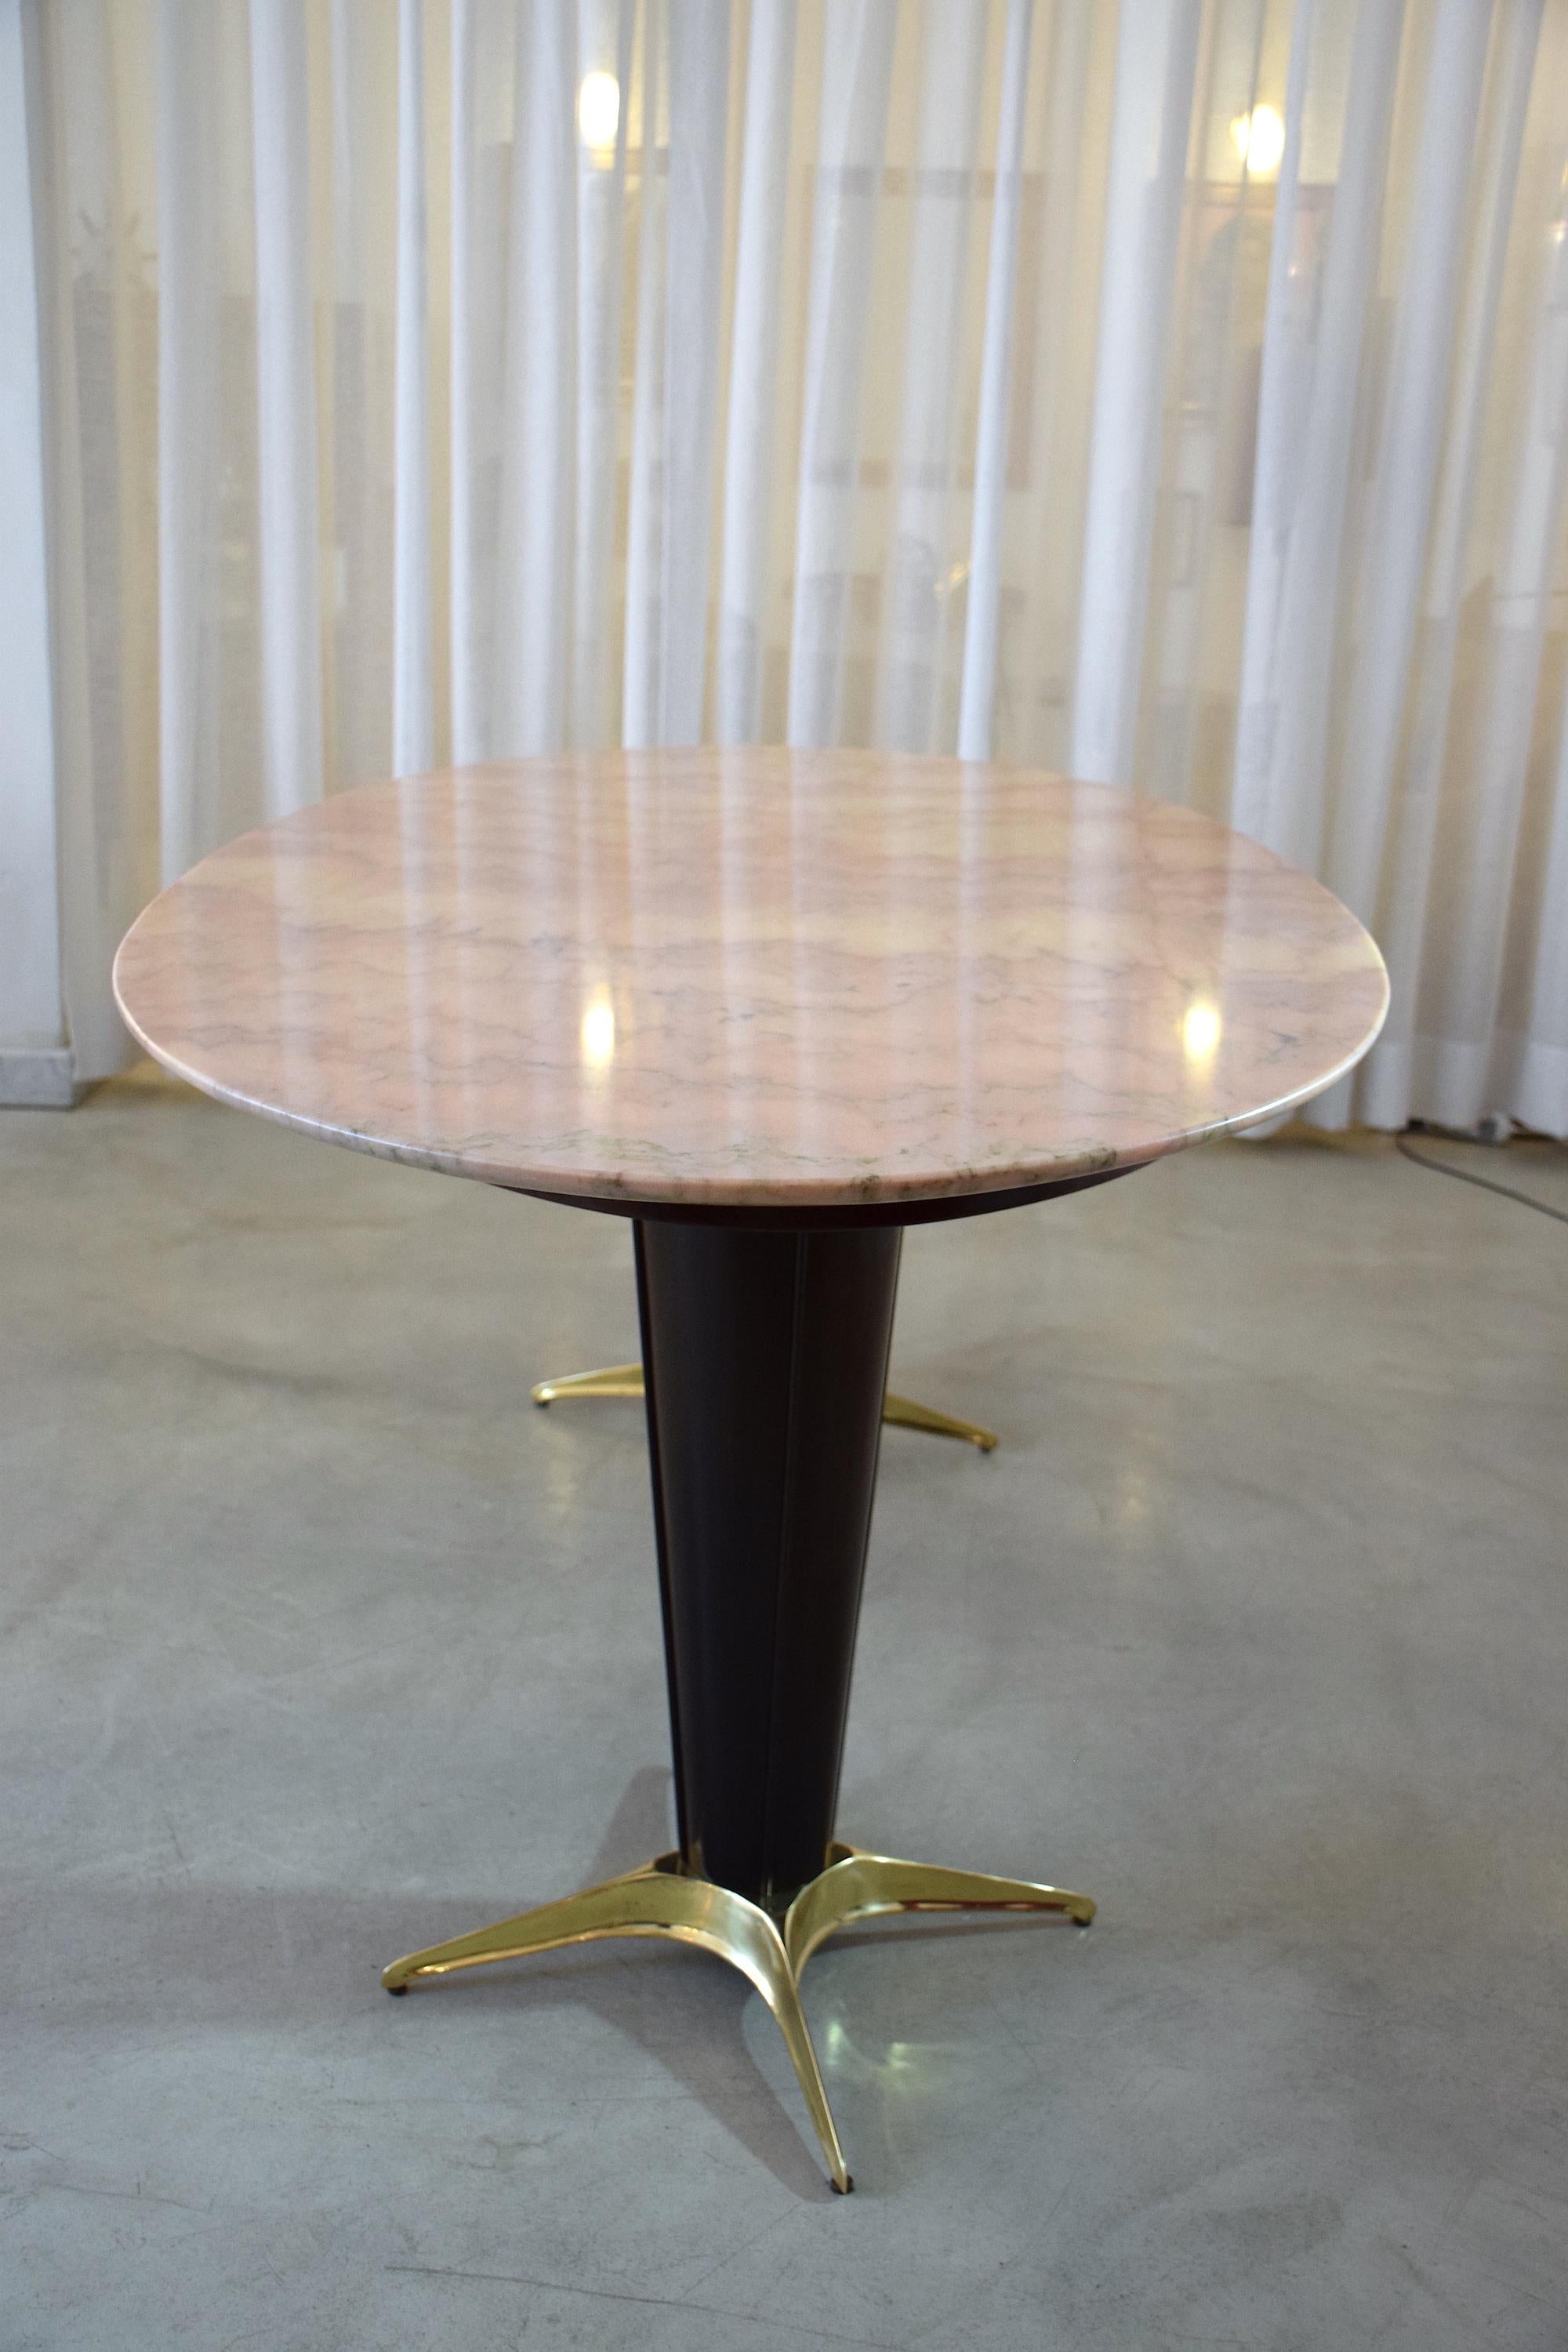 Italian Midcentury Big Oval Marble Dining Table, 1950s For Sale 1